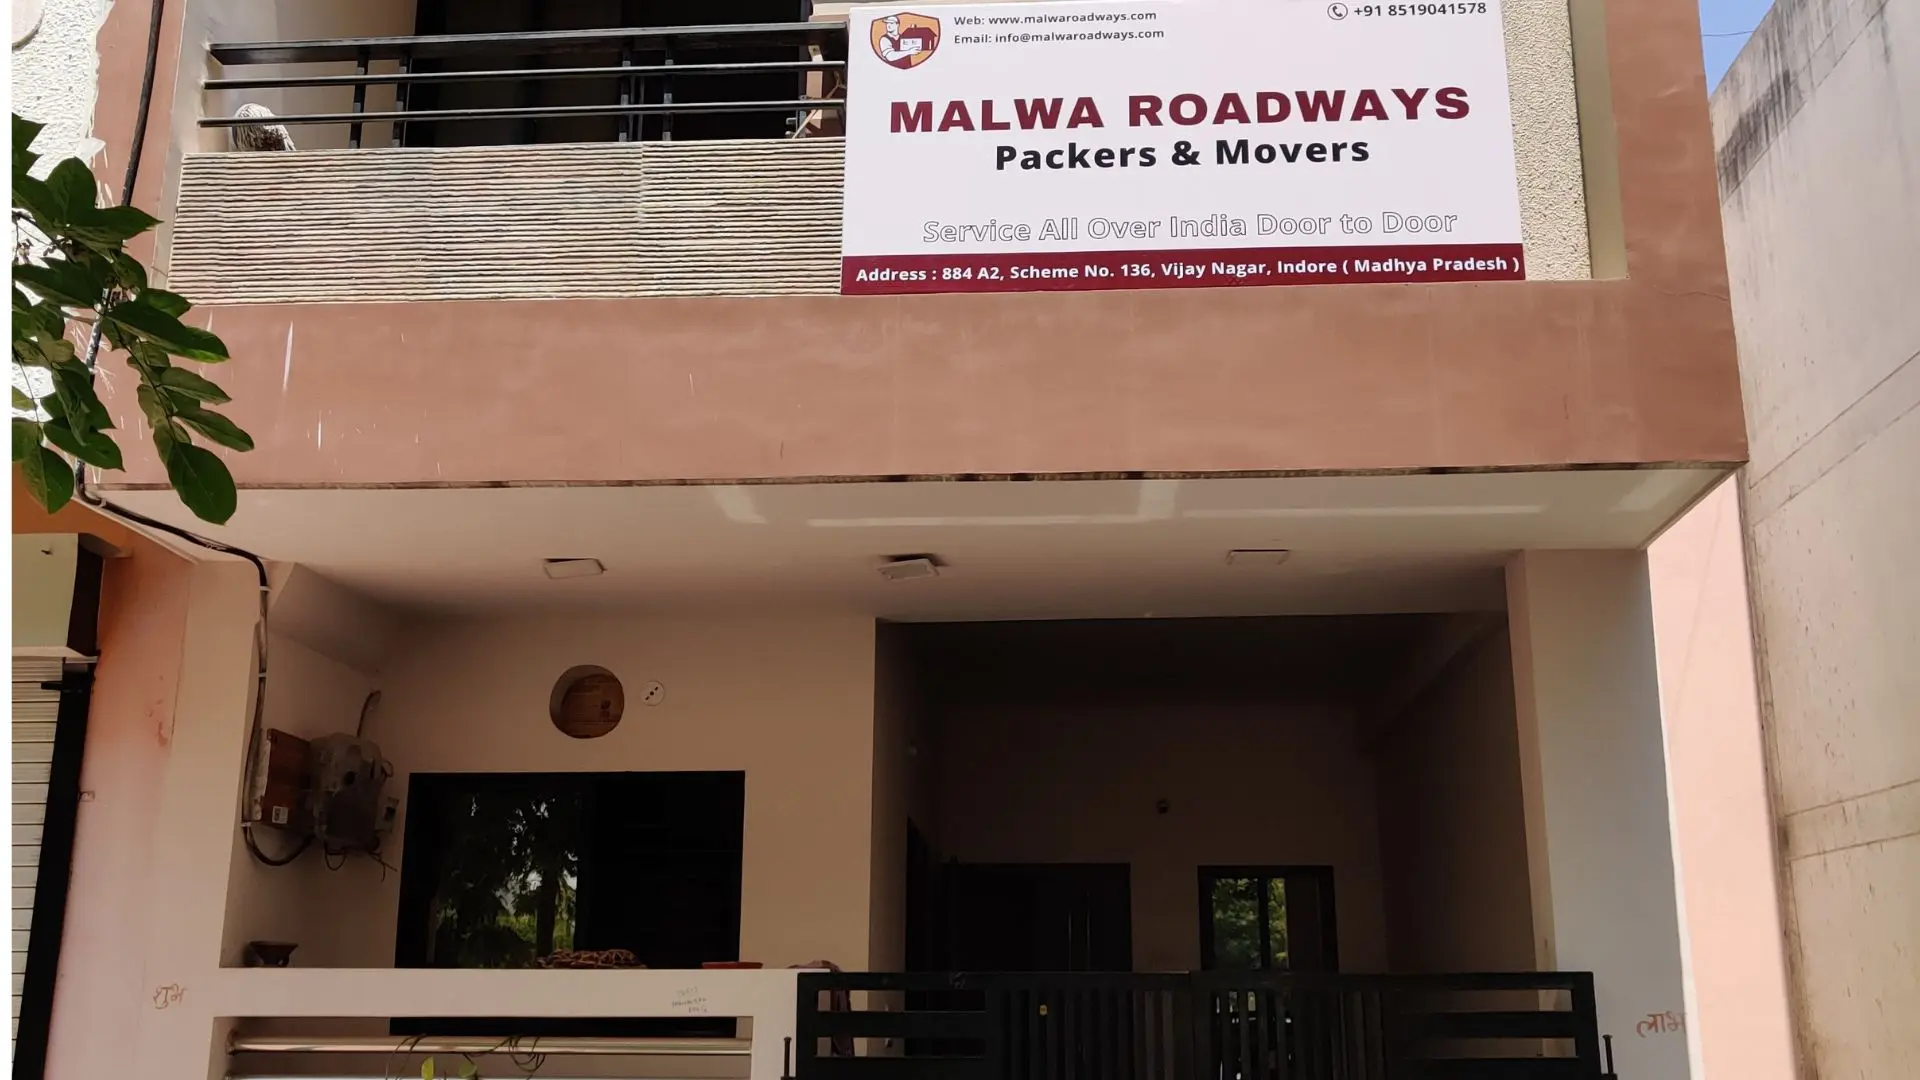 Malwa Roadways Packers and Movers Indore office